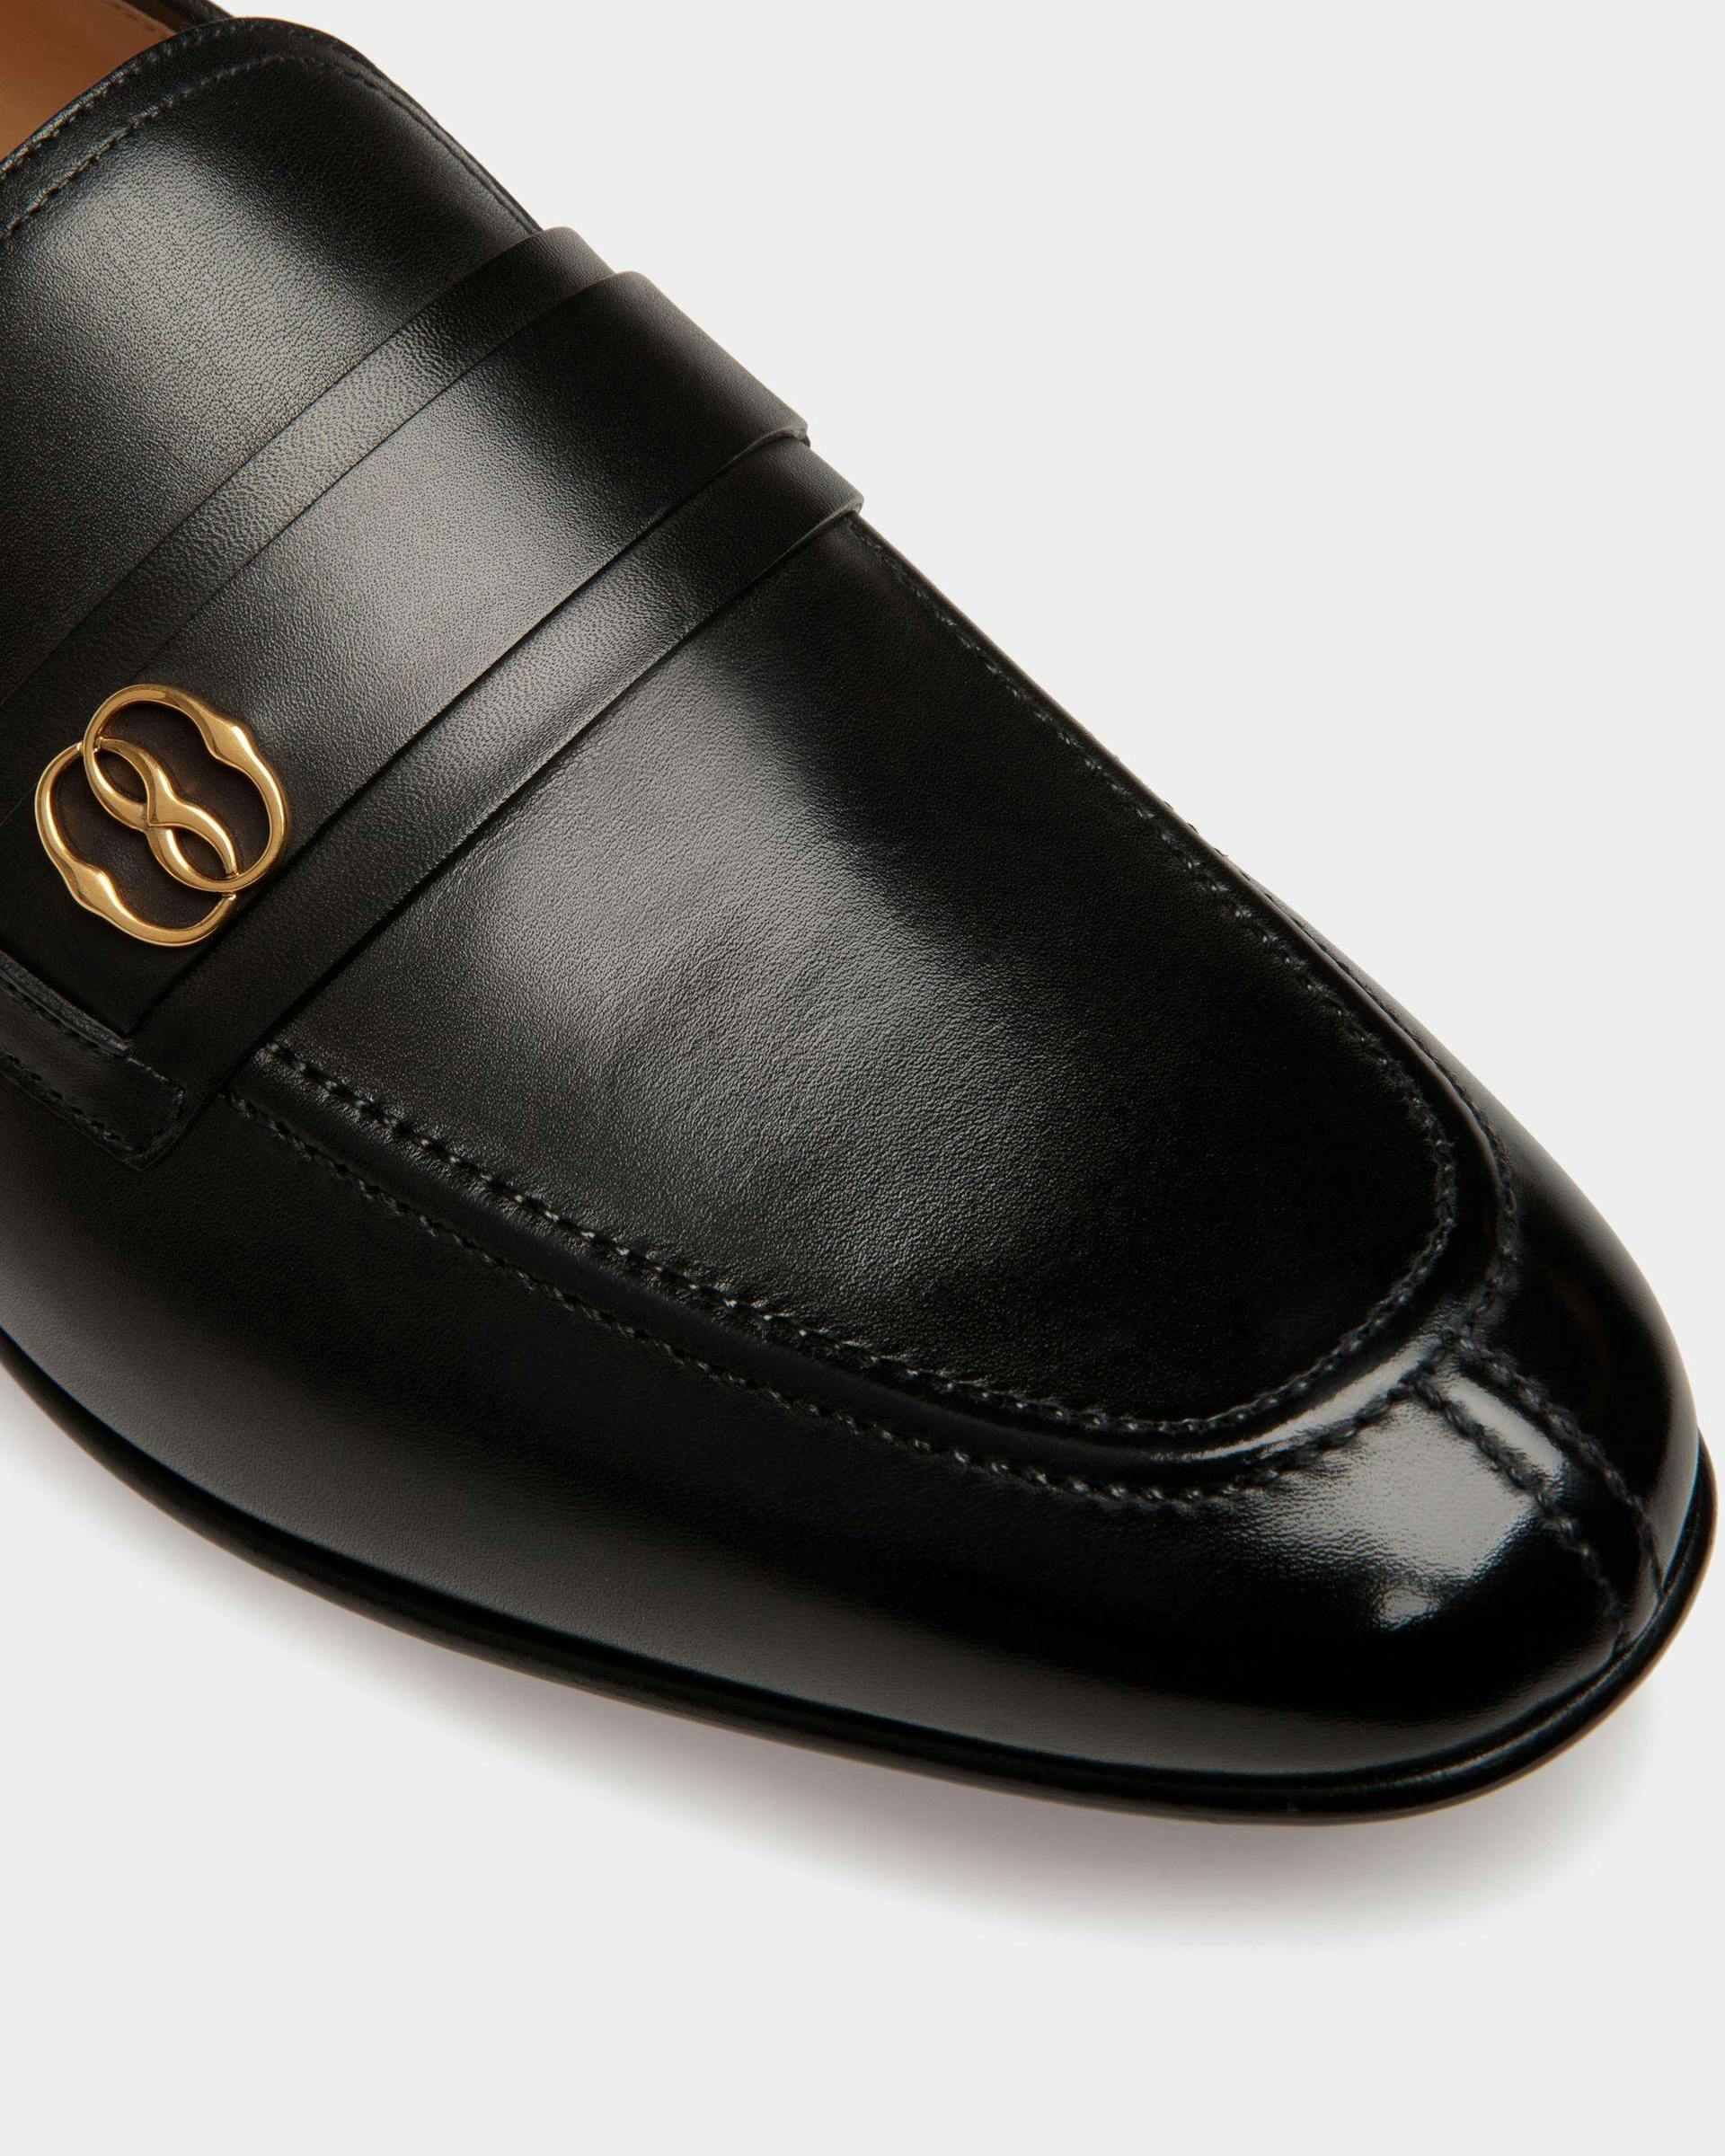 Men's Suisse Loafers In Black Leather | Bally | Still Life Detail